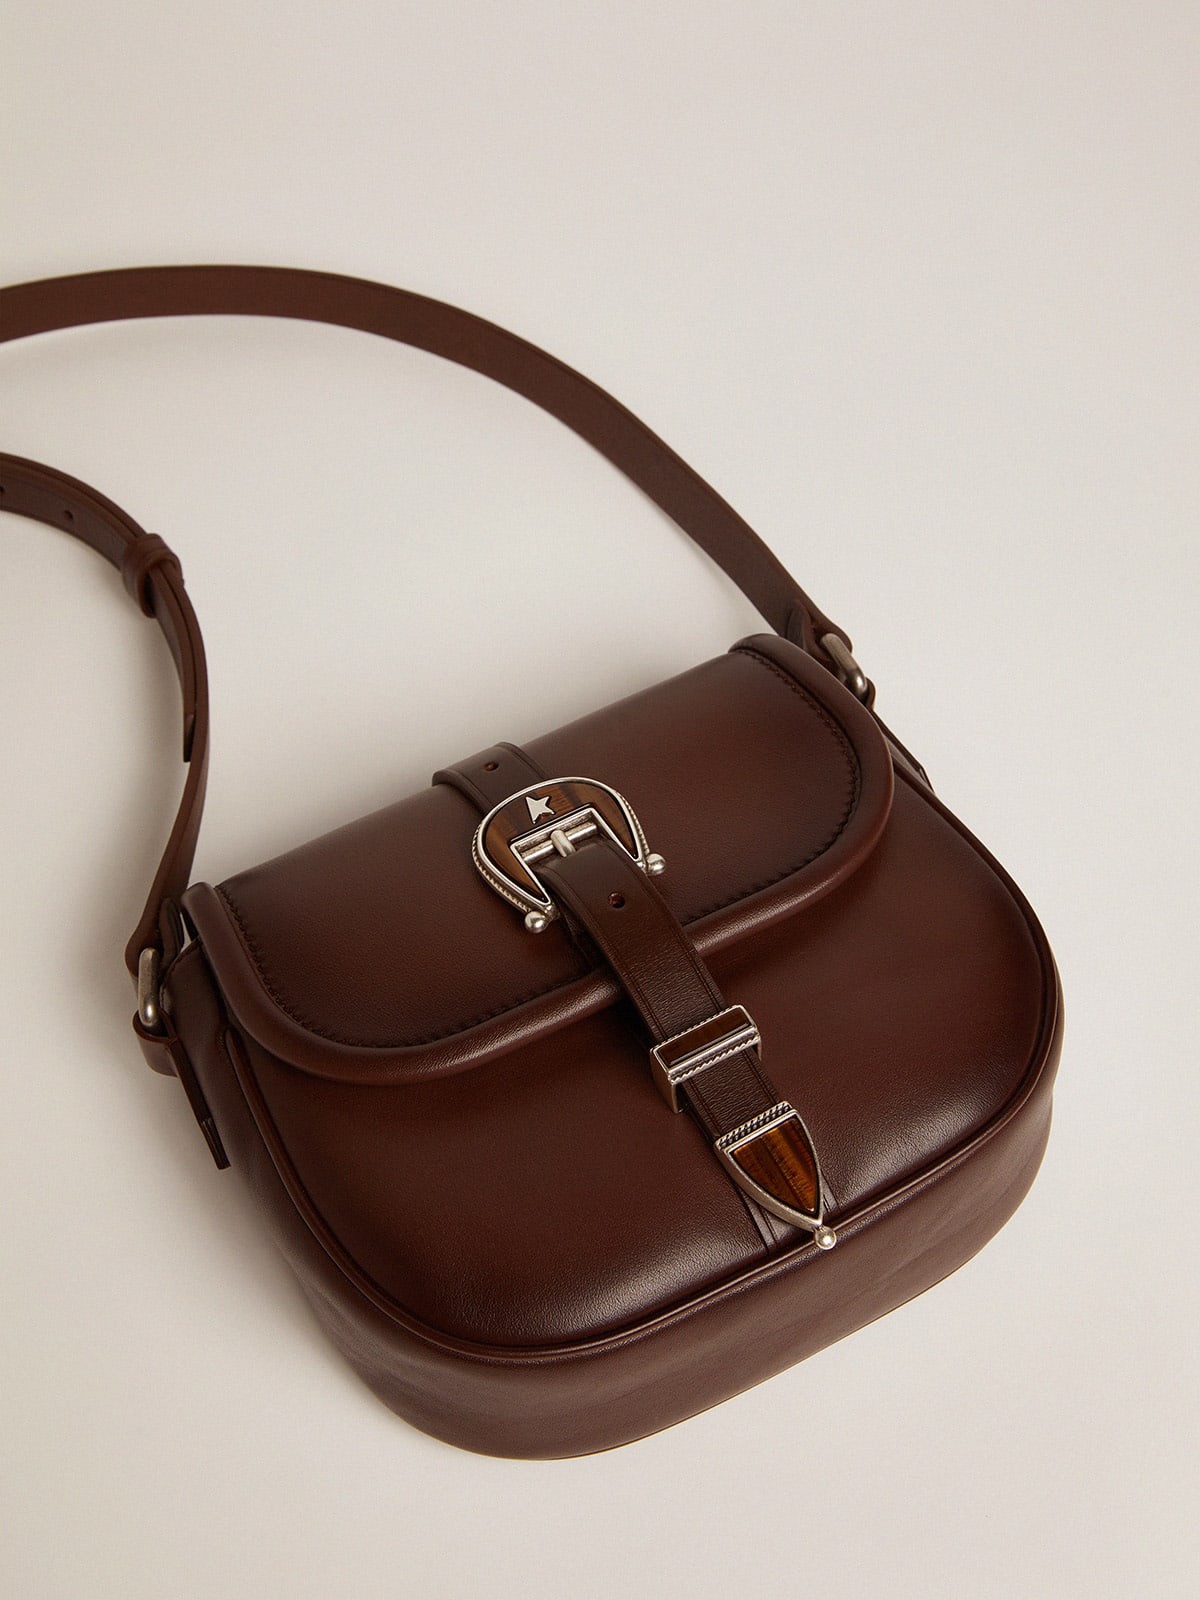 Golden Goose - Small Rodeo Bag in dark tan leather     in 